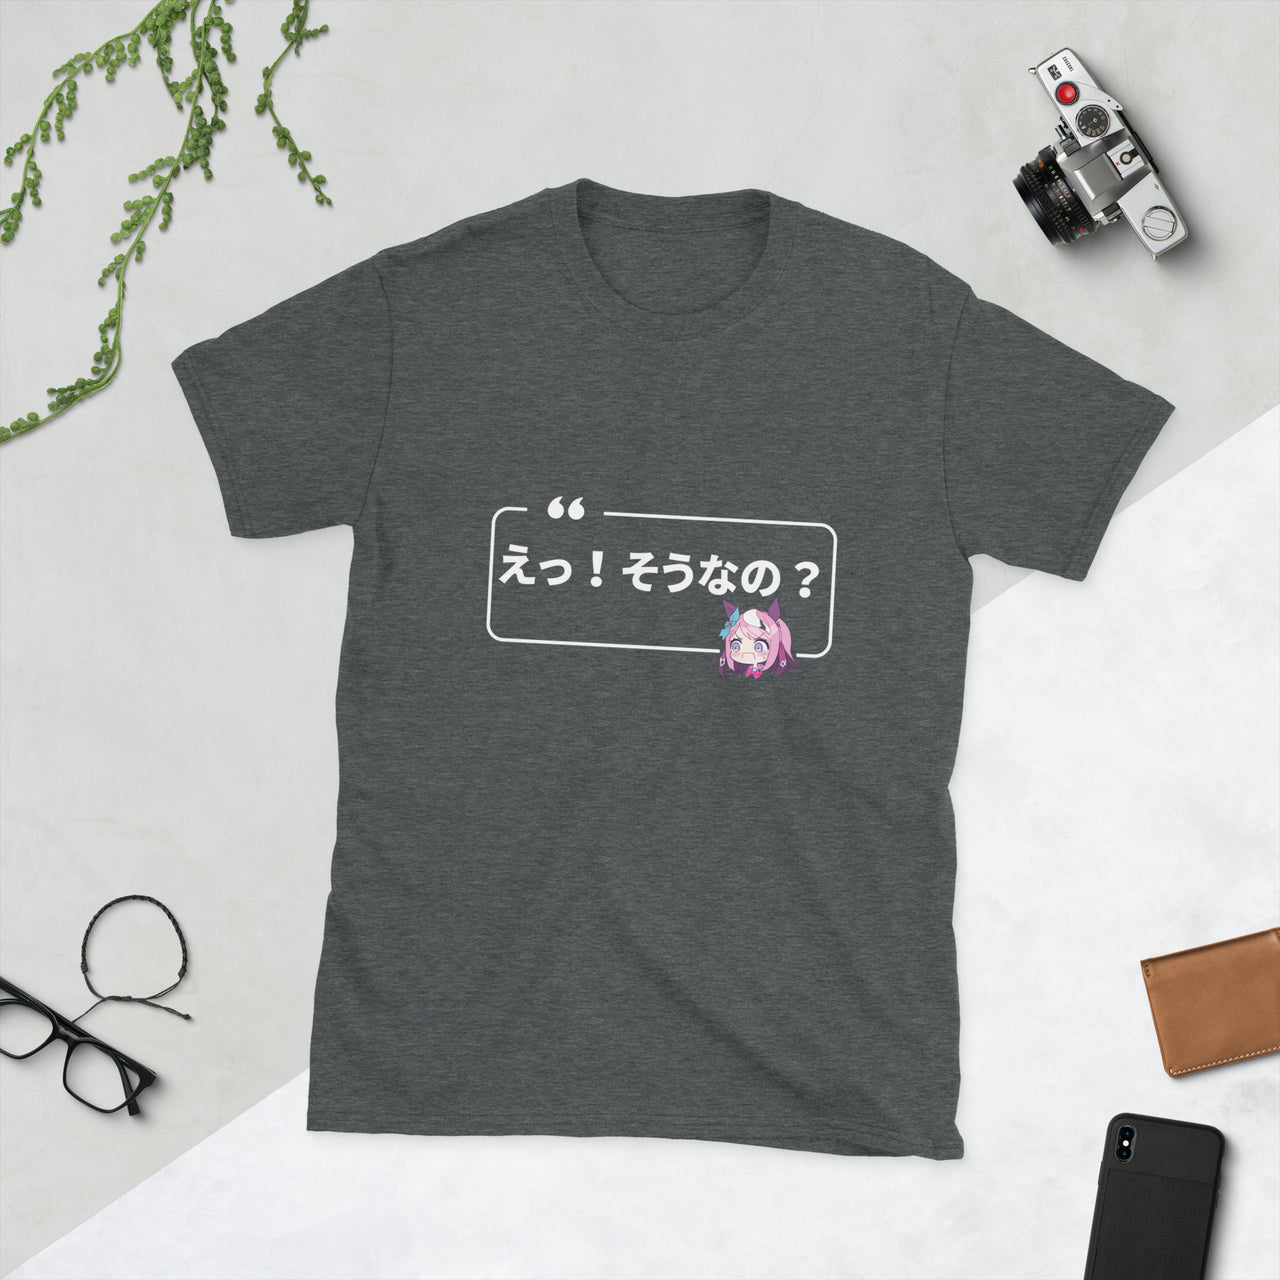 You Don't Say! in Japanese Short-Sleeve Unisex T-Shirt